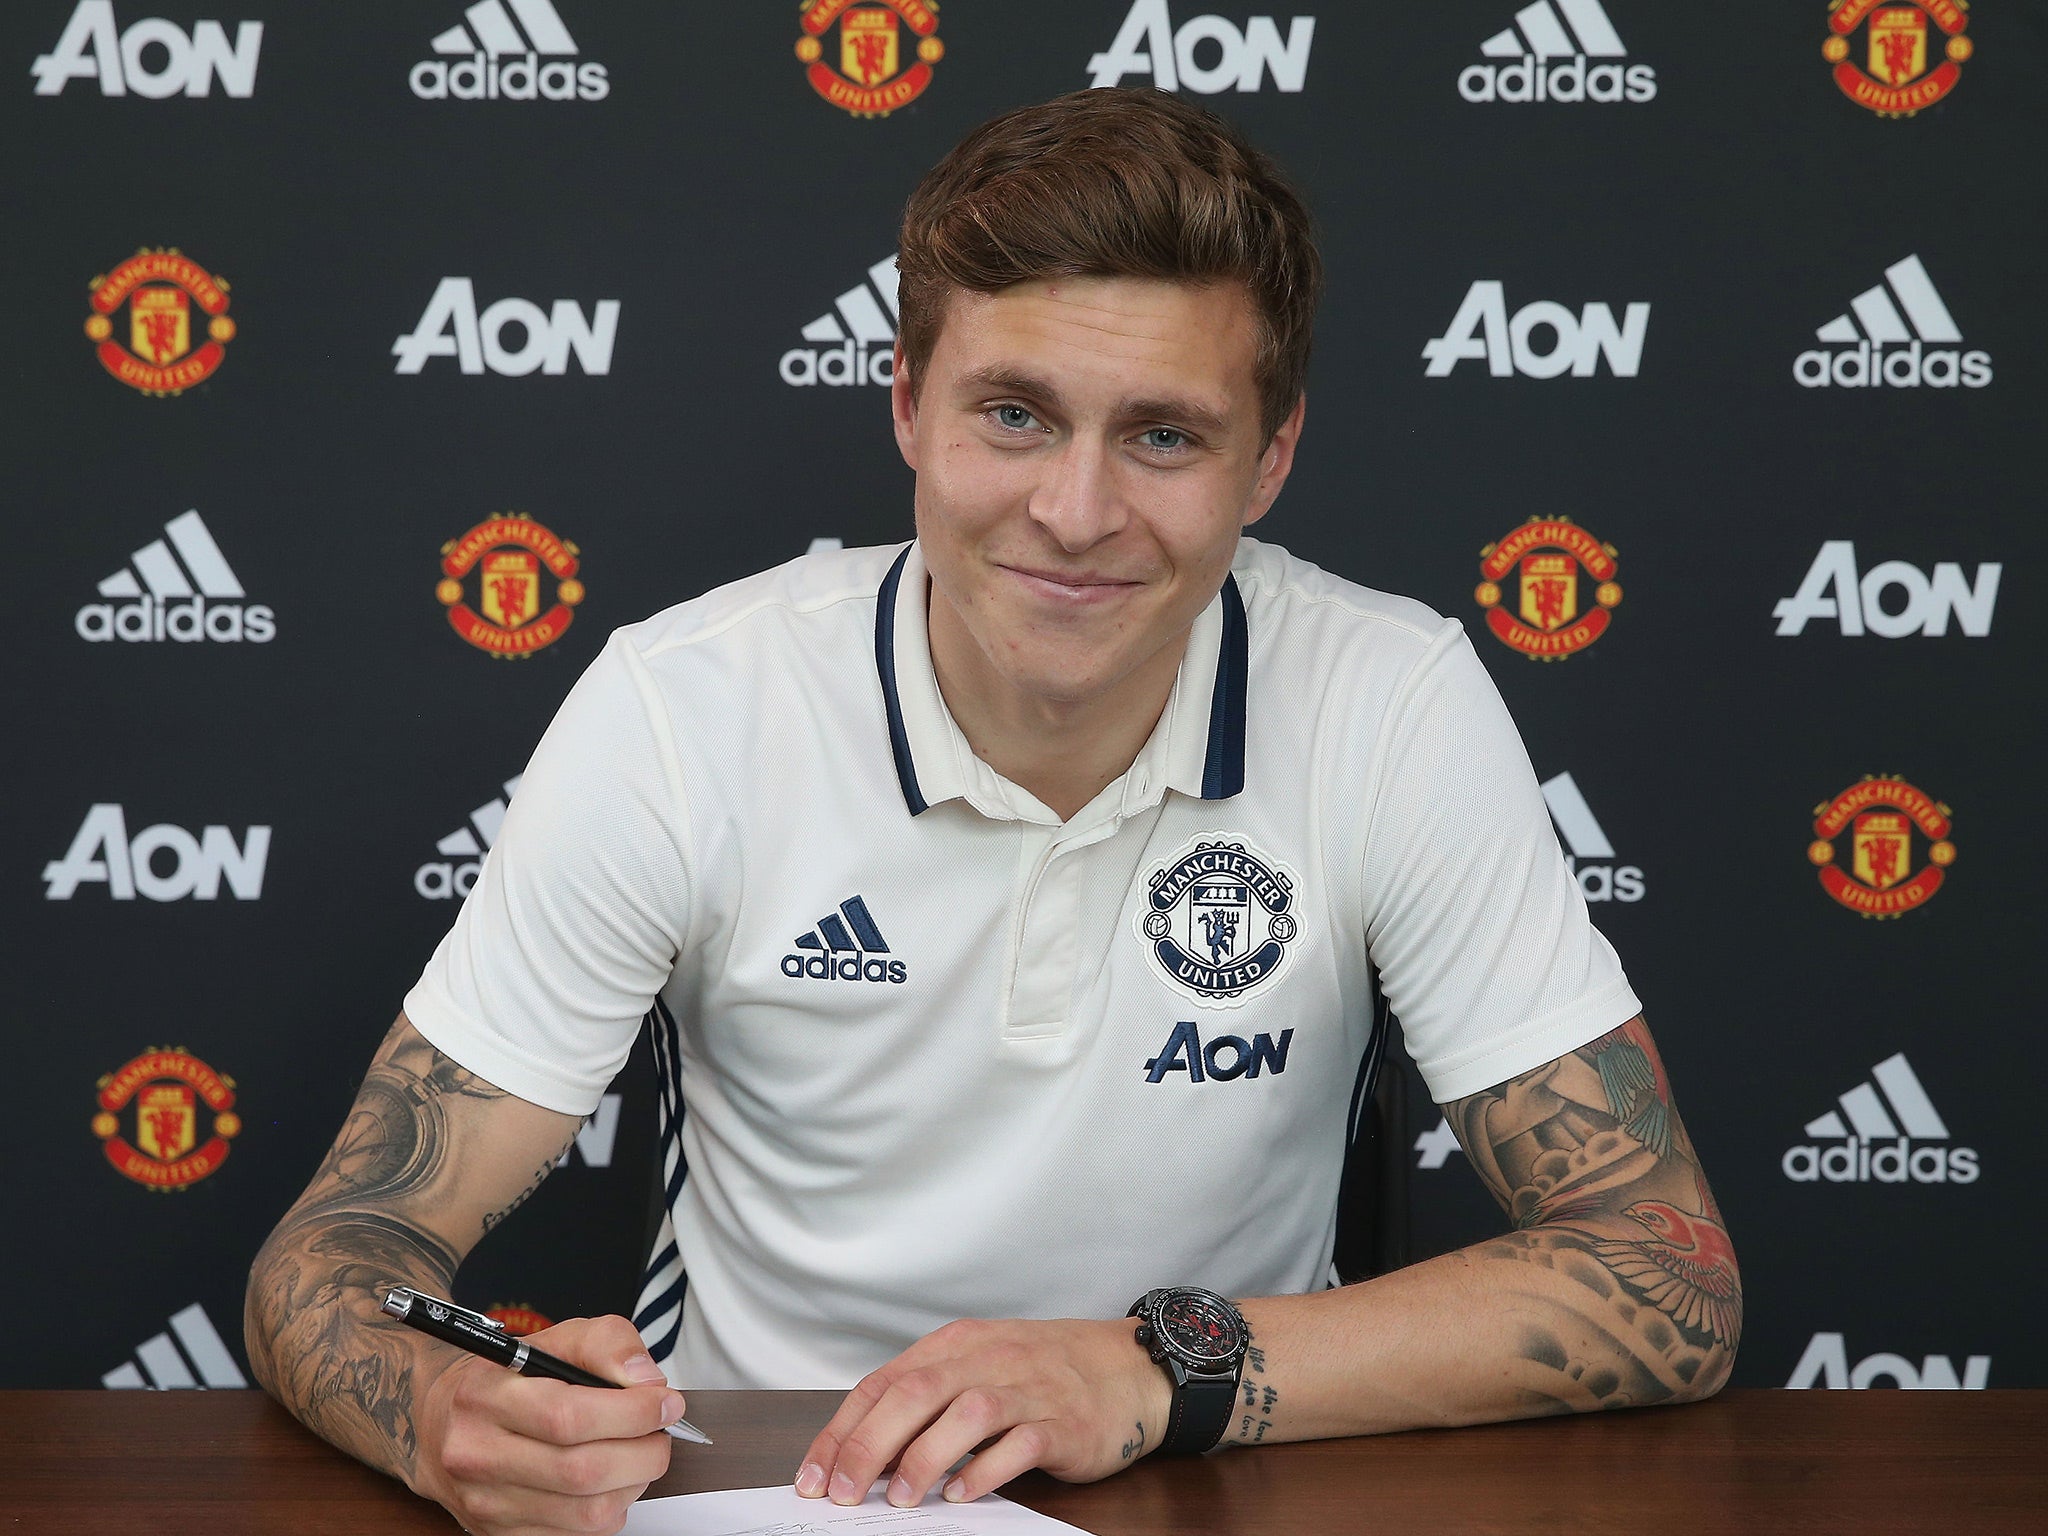 Manchester United have completed the signing of Victor Lindelof from Benfica